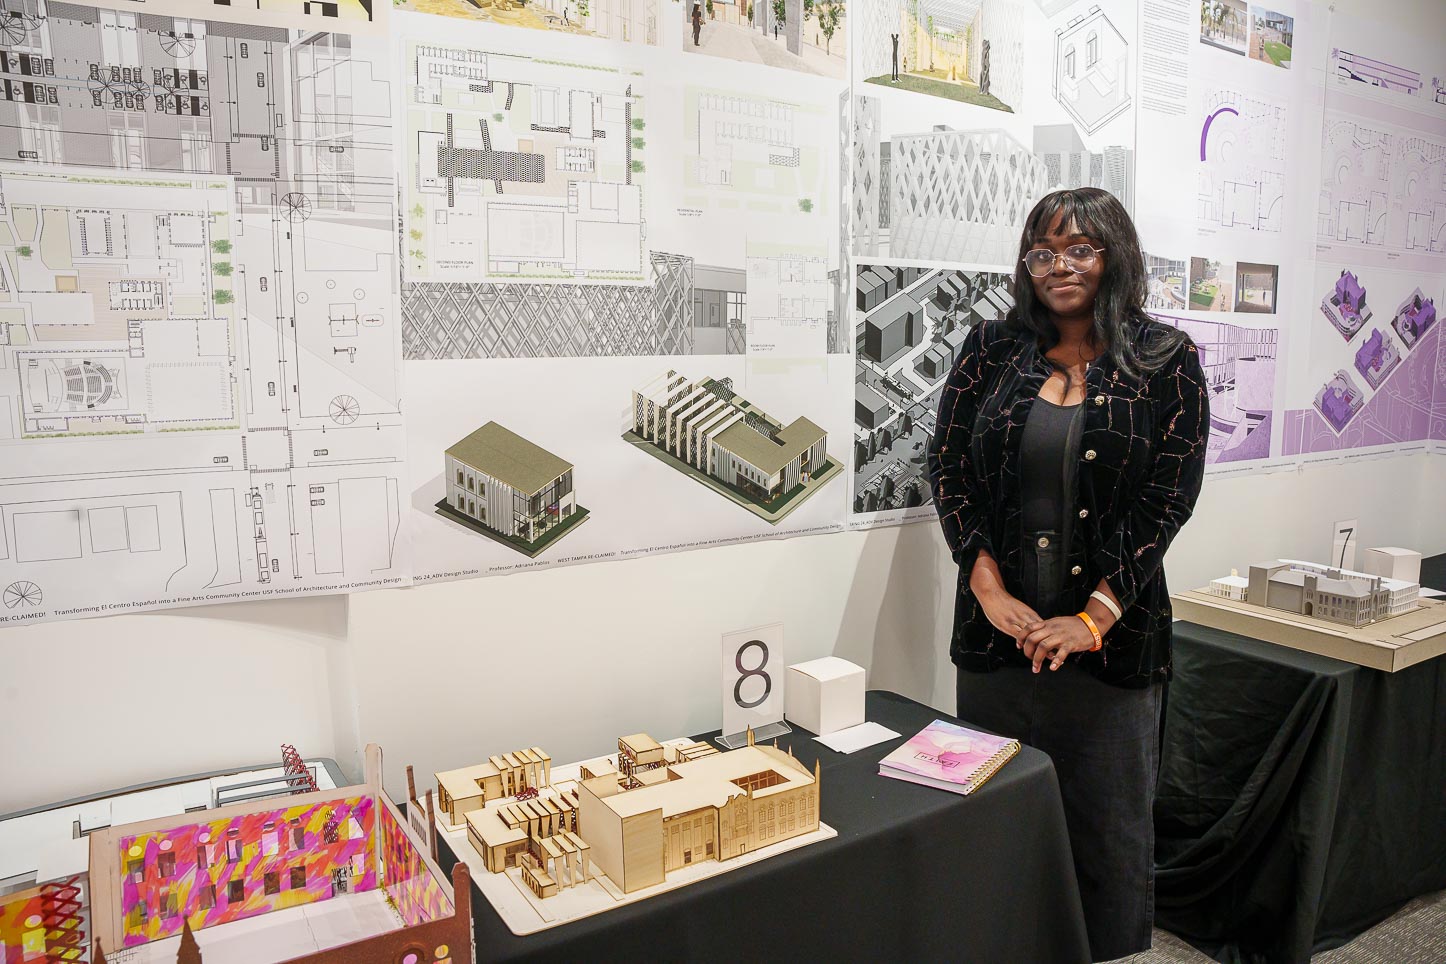 Sarah Verty poses next to her Architecture project.